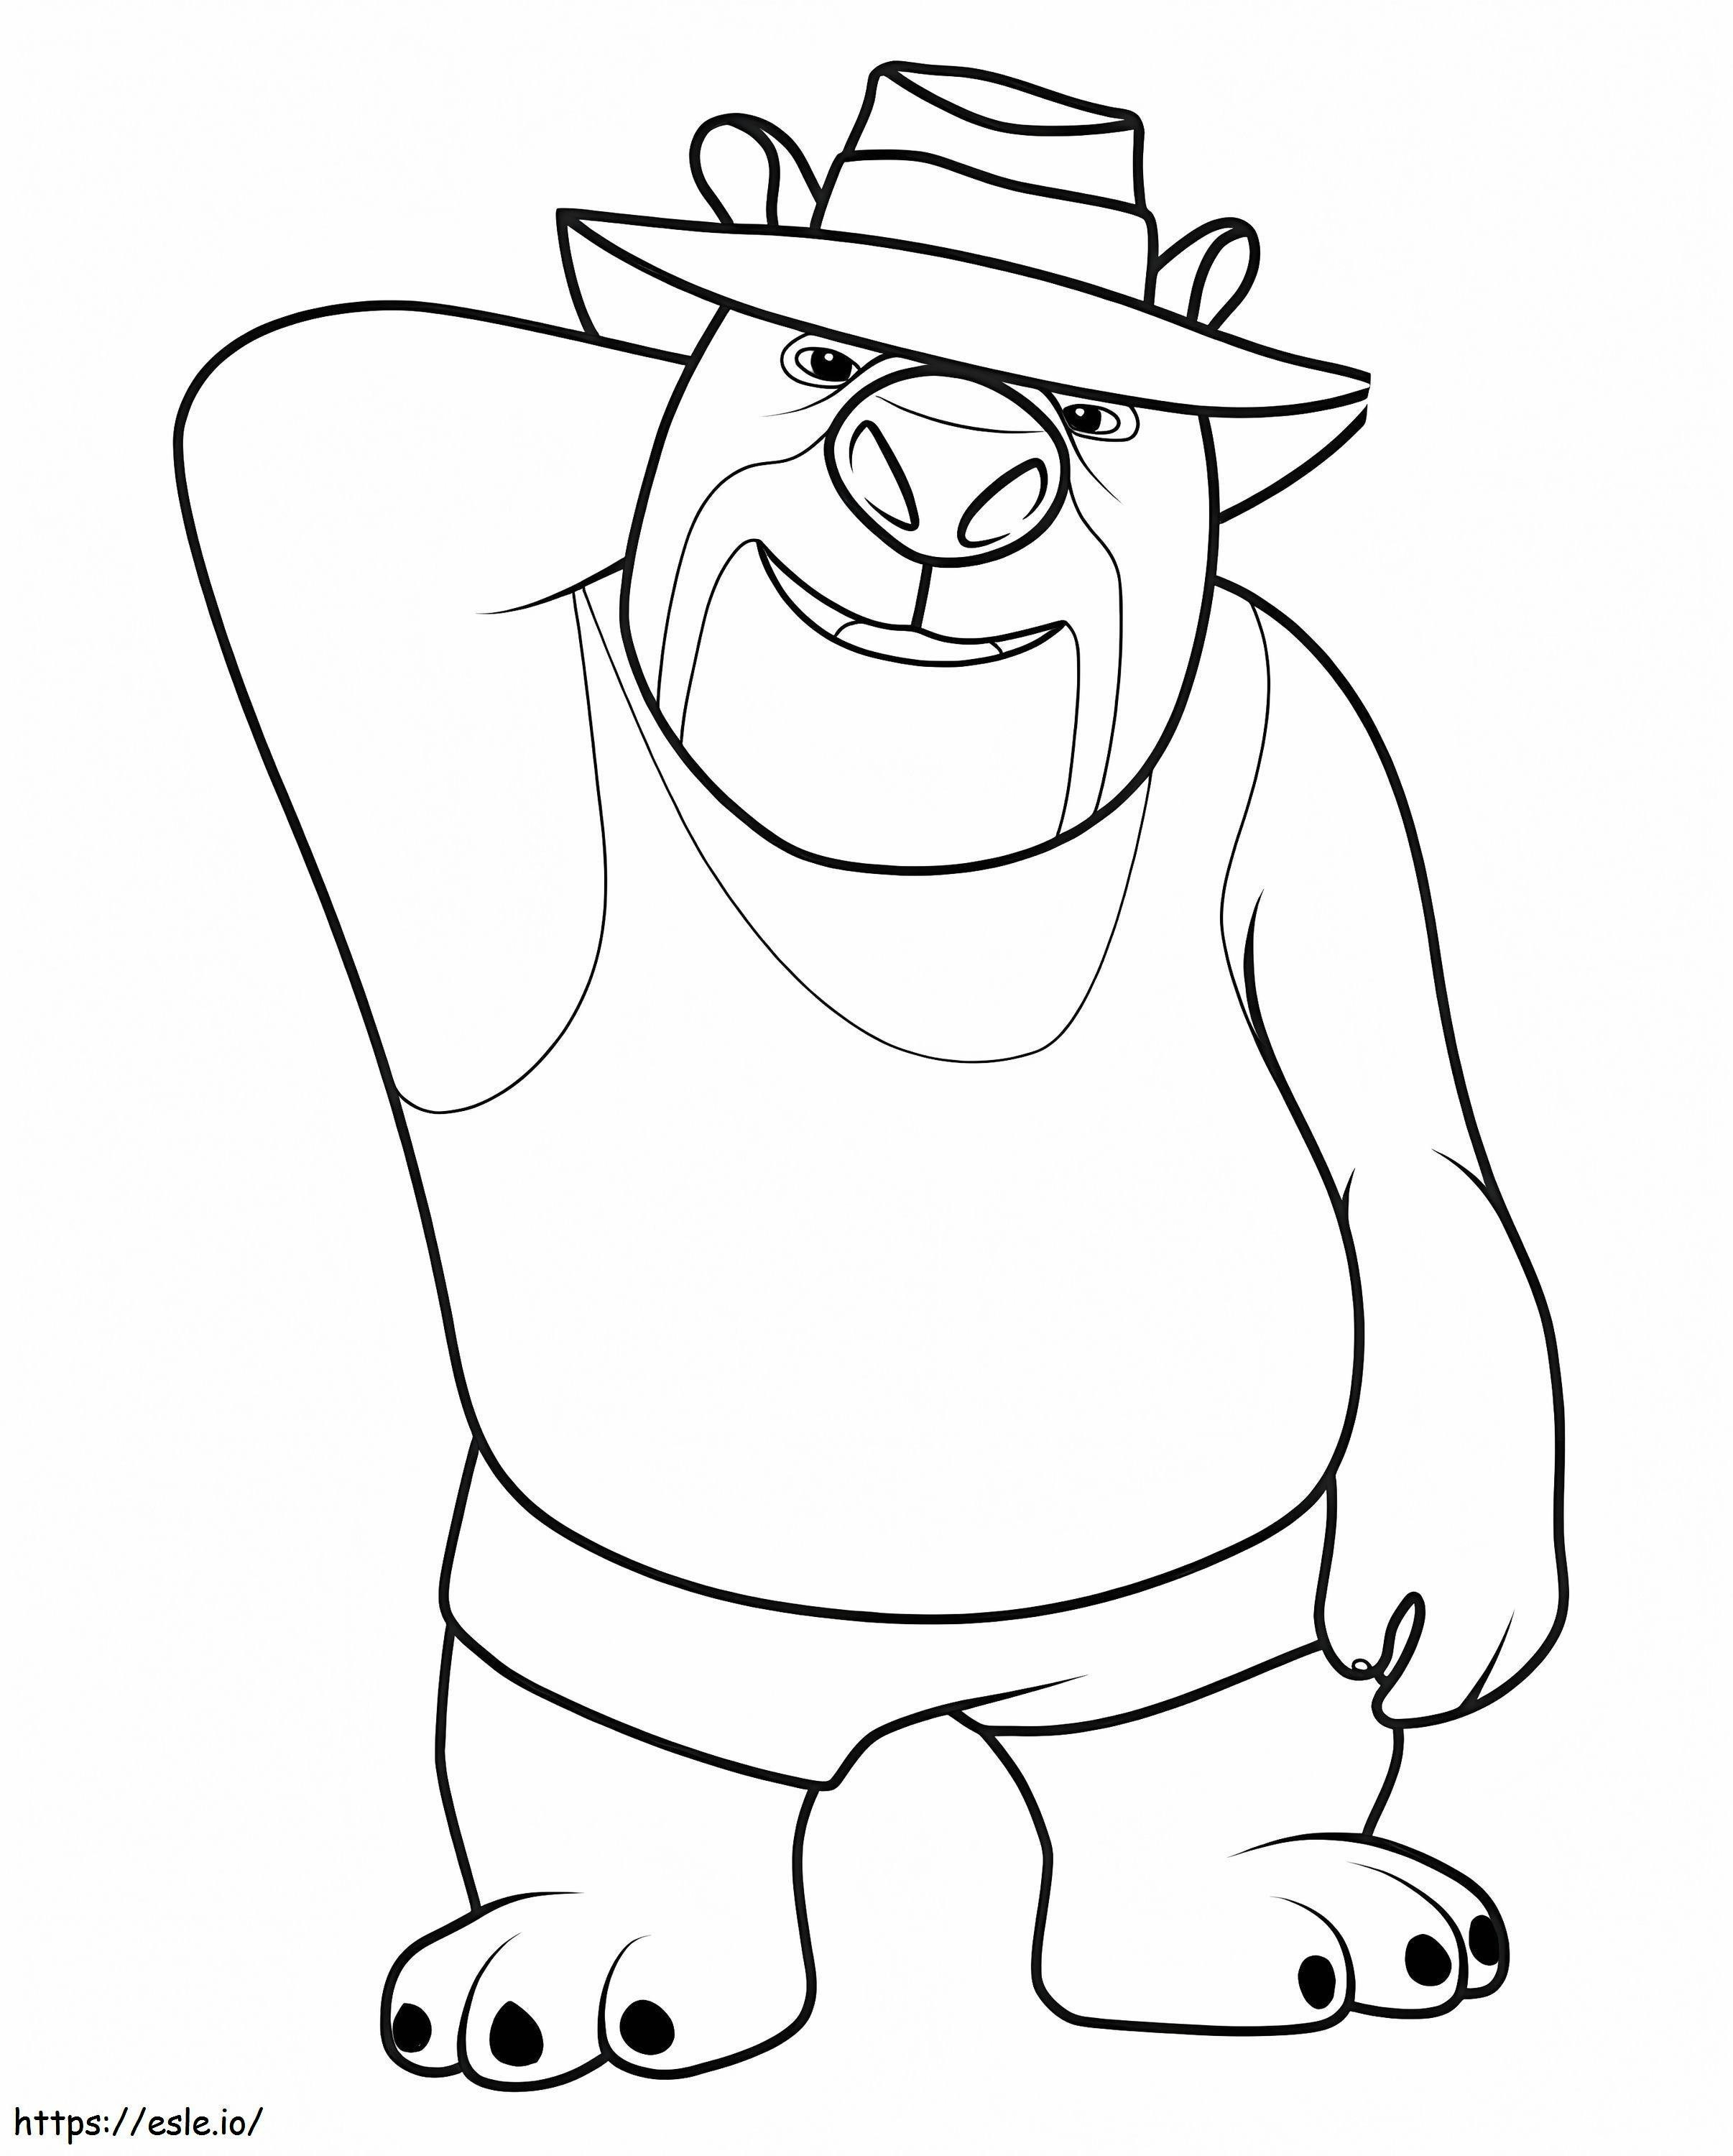 Wombo From Blinky Bill coloring page